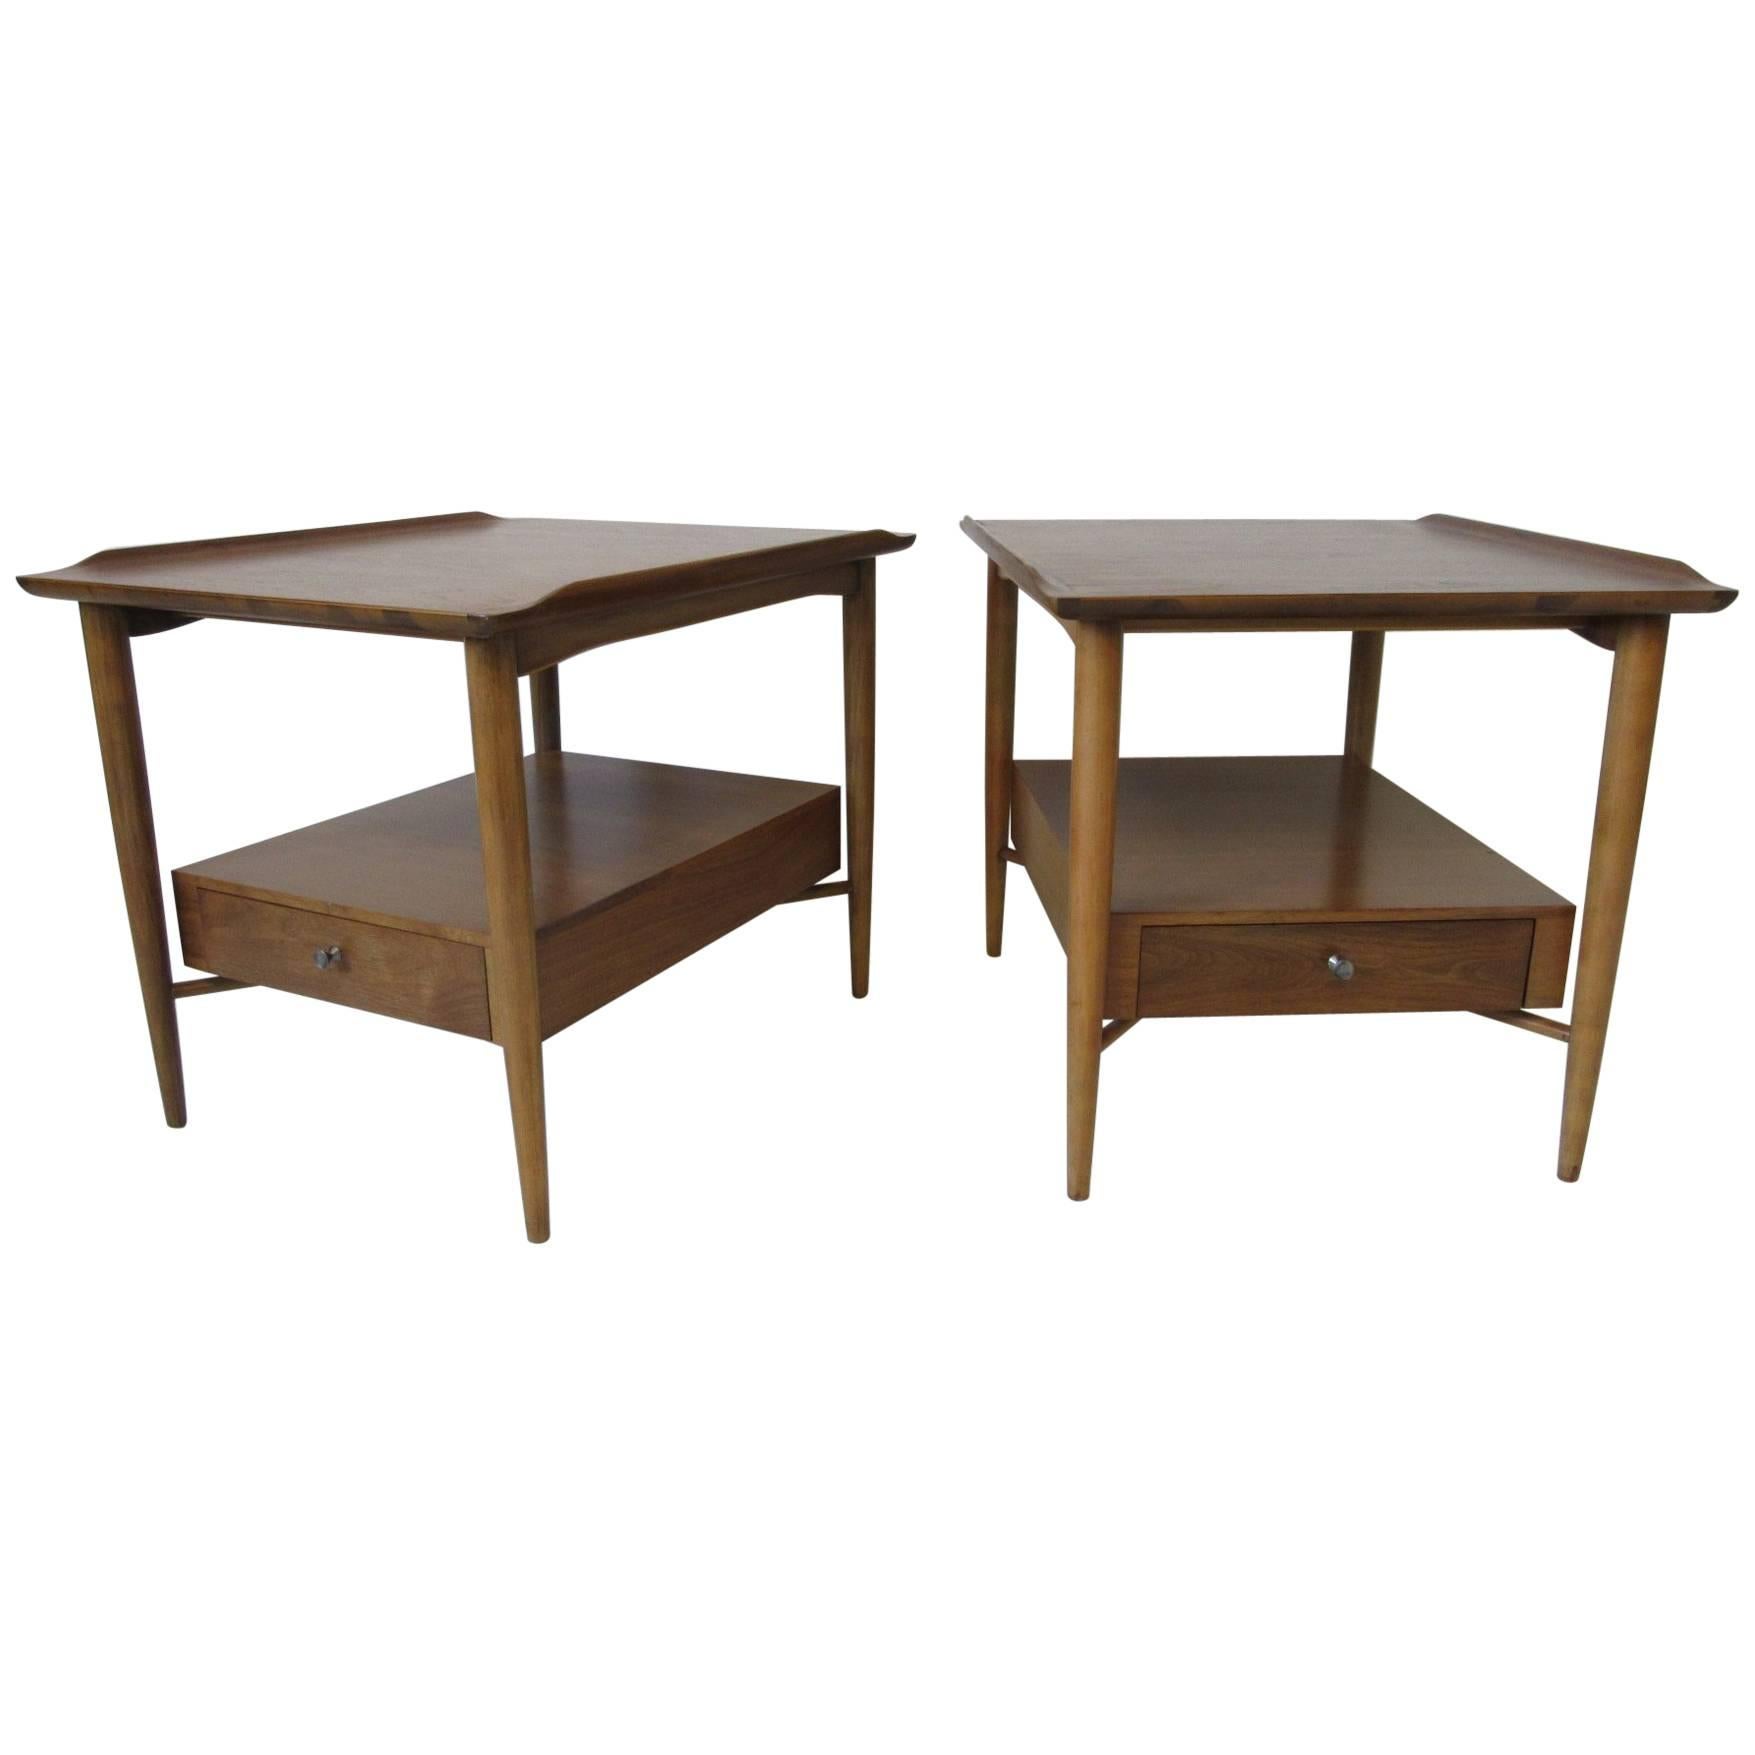 Finn Juhl Styled Wooden Mahogany End / Side Tables or Nightstands by Morganton